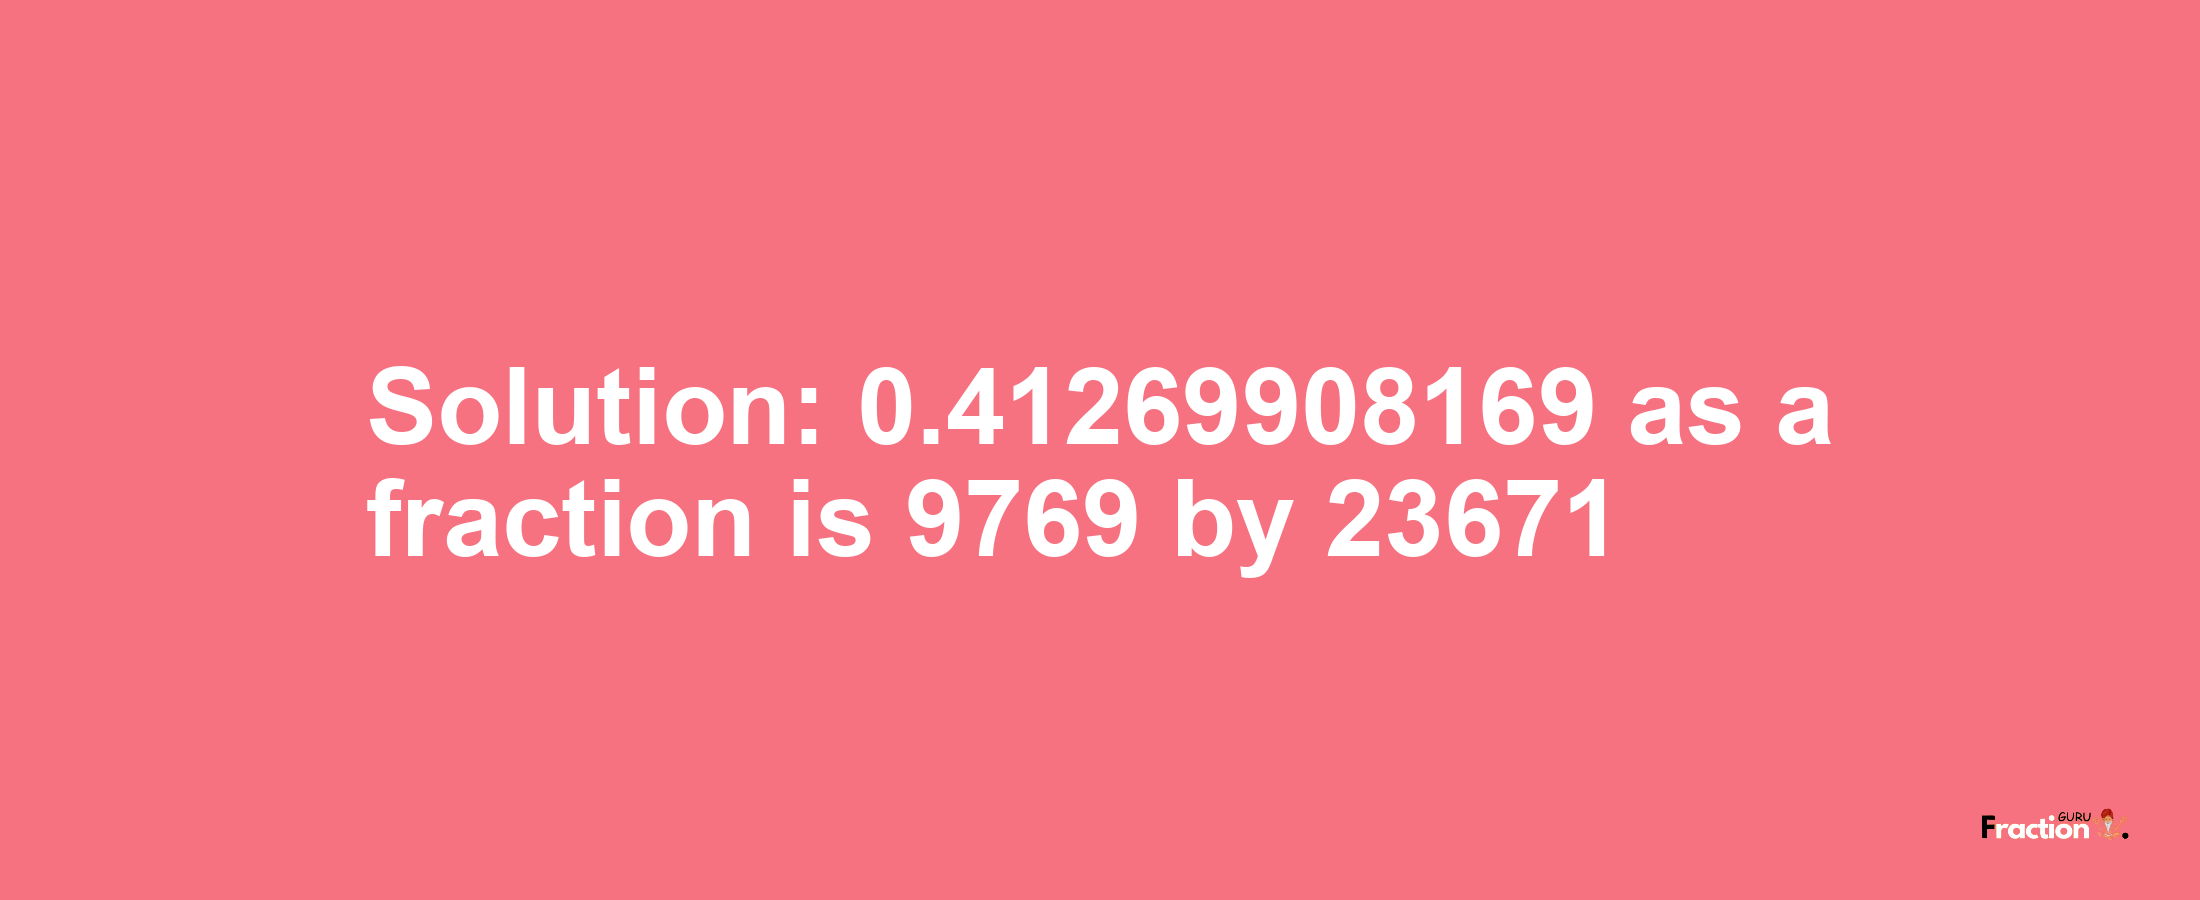 Solution:0.41269908169 as a fraction is 9769/23671